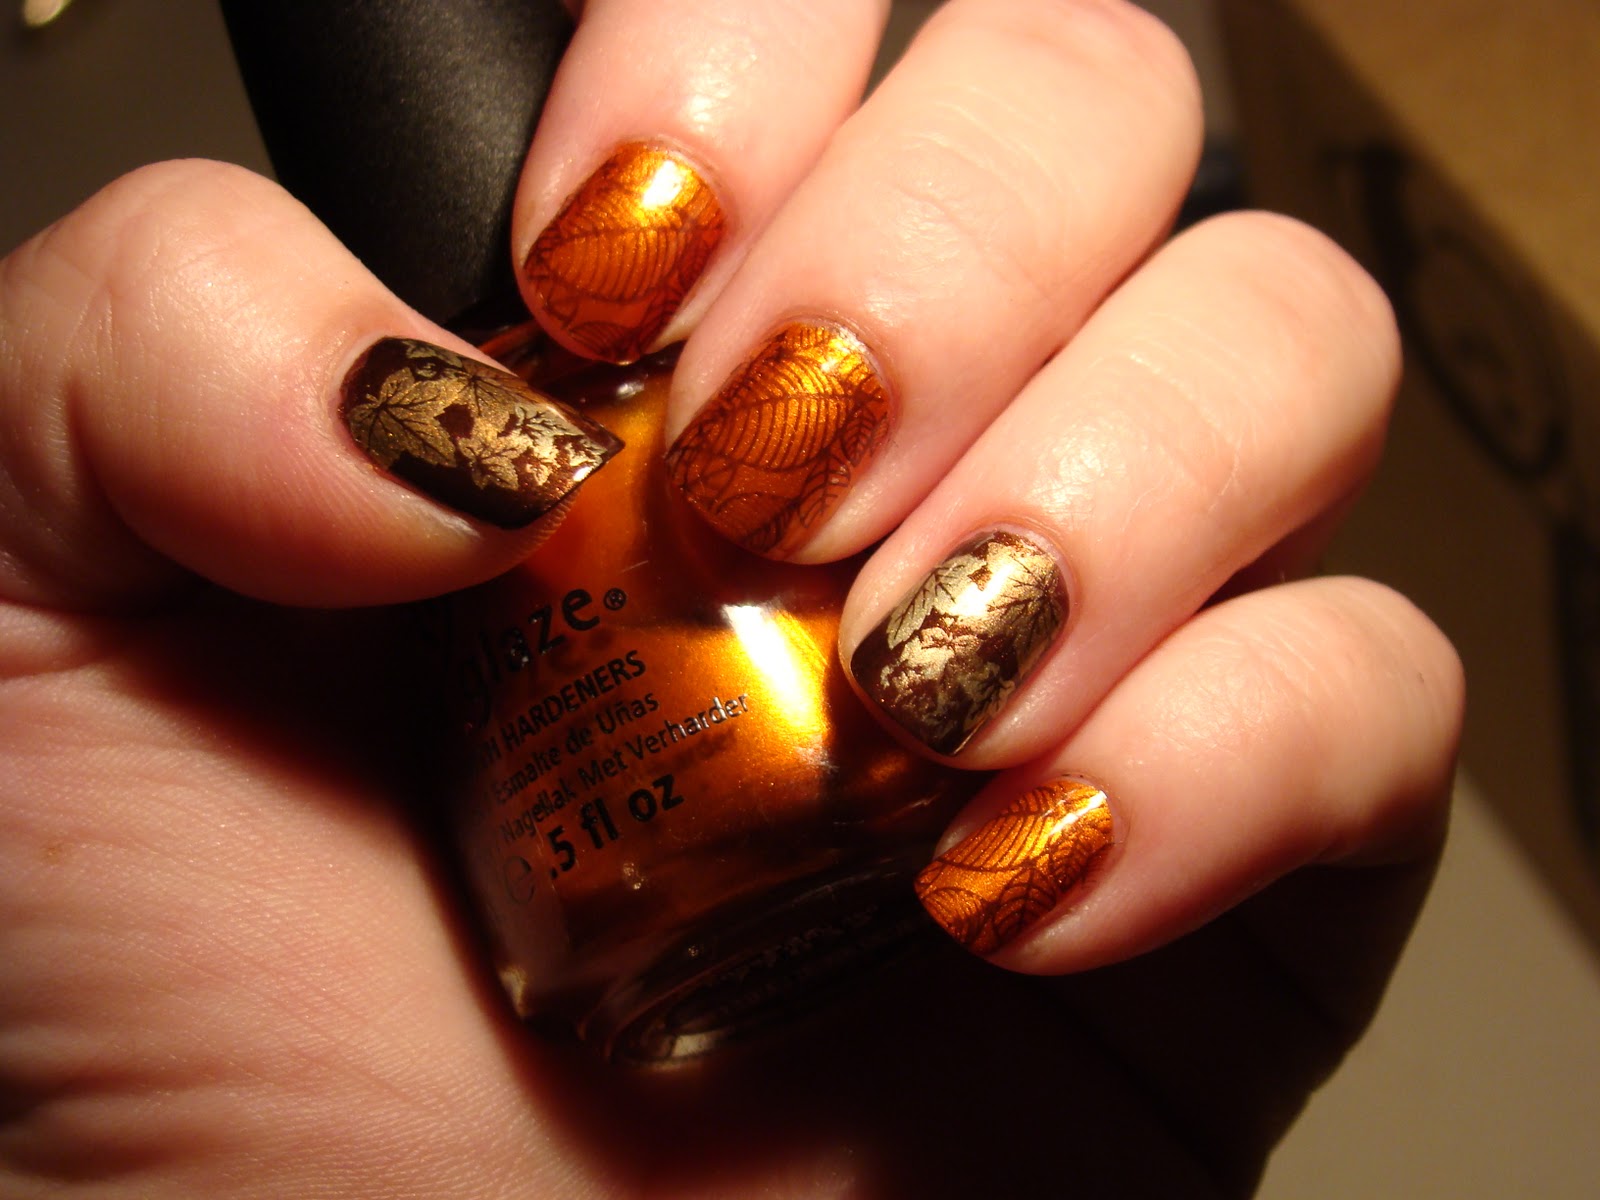 Gorgeous Autumn Inspired Nails - From Mane 'n Tail